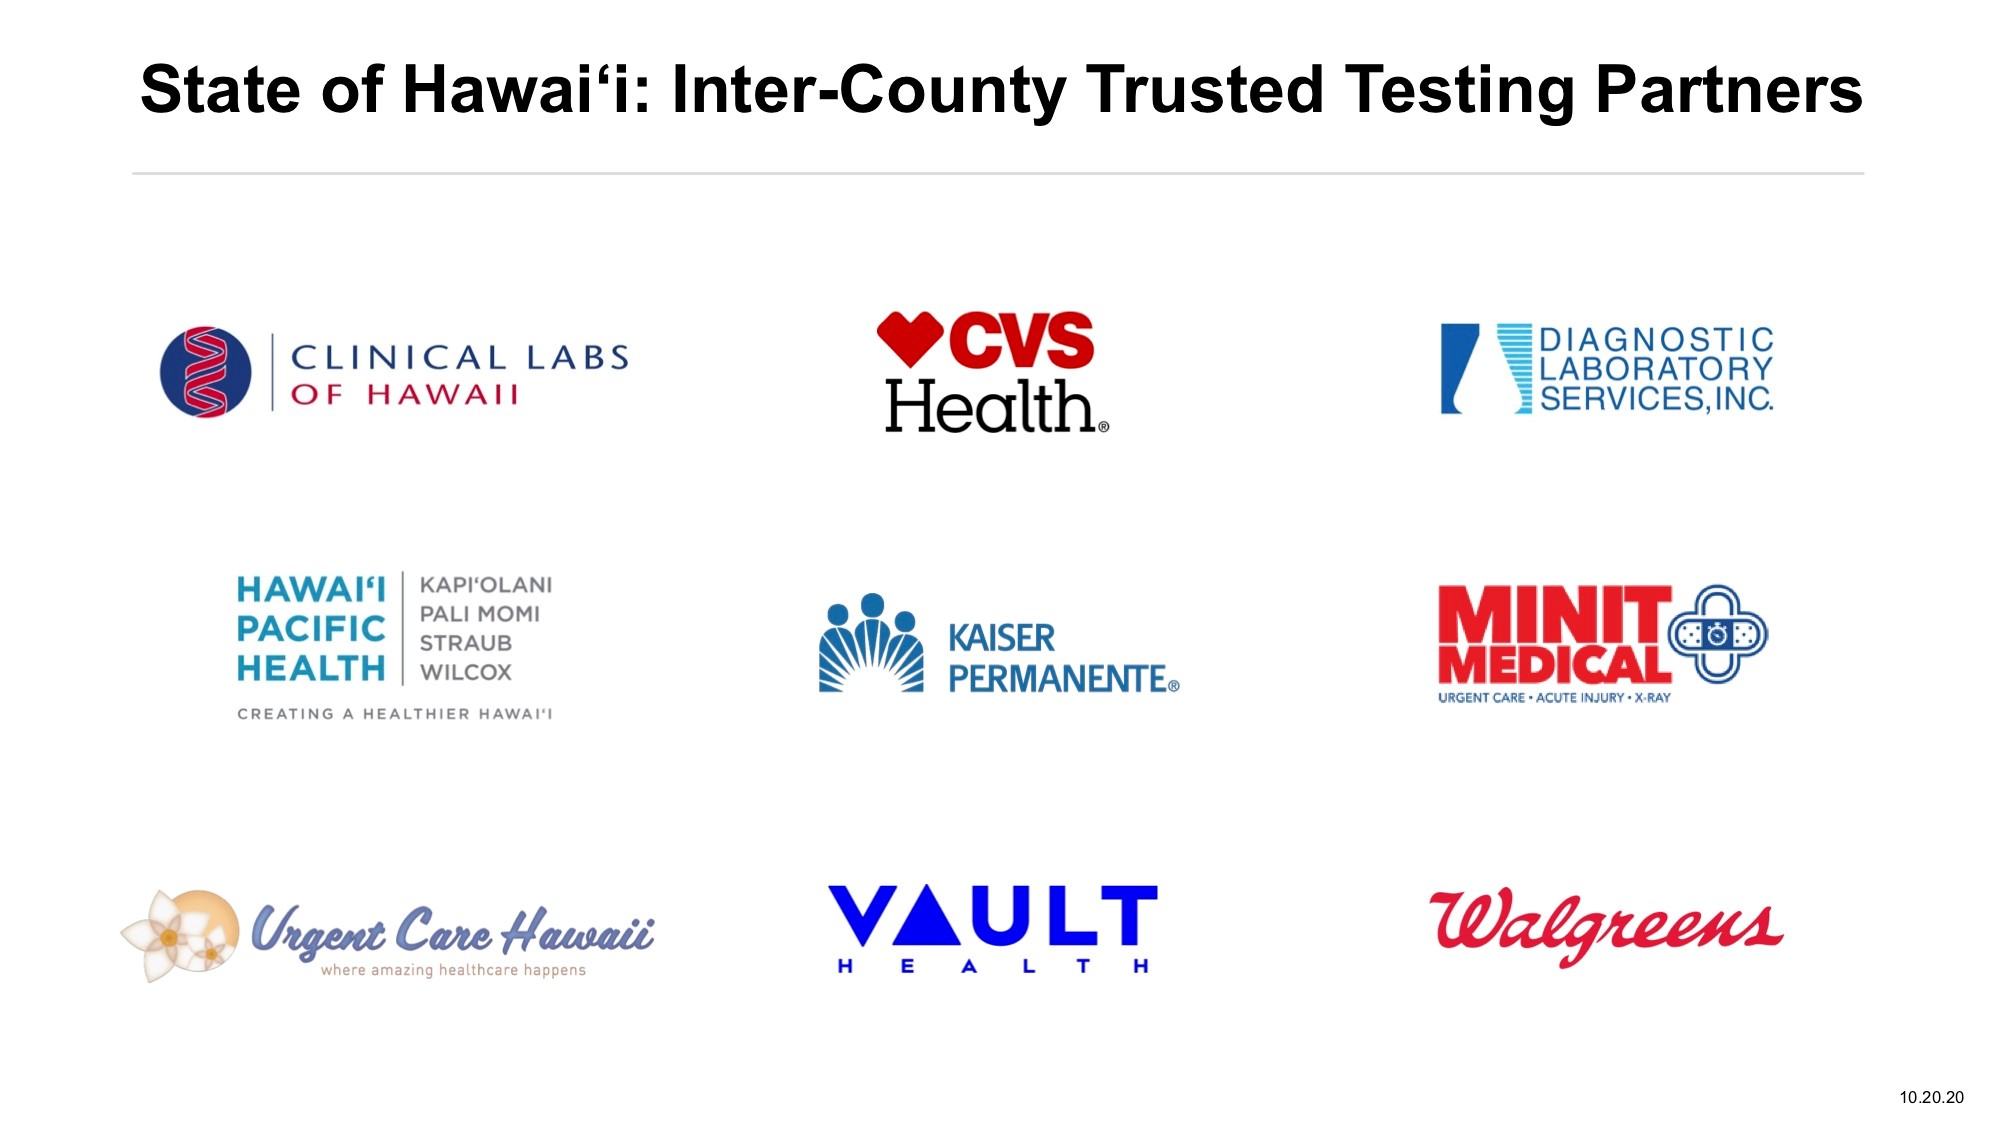 Inter-County Trusted Testing Partners